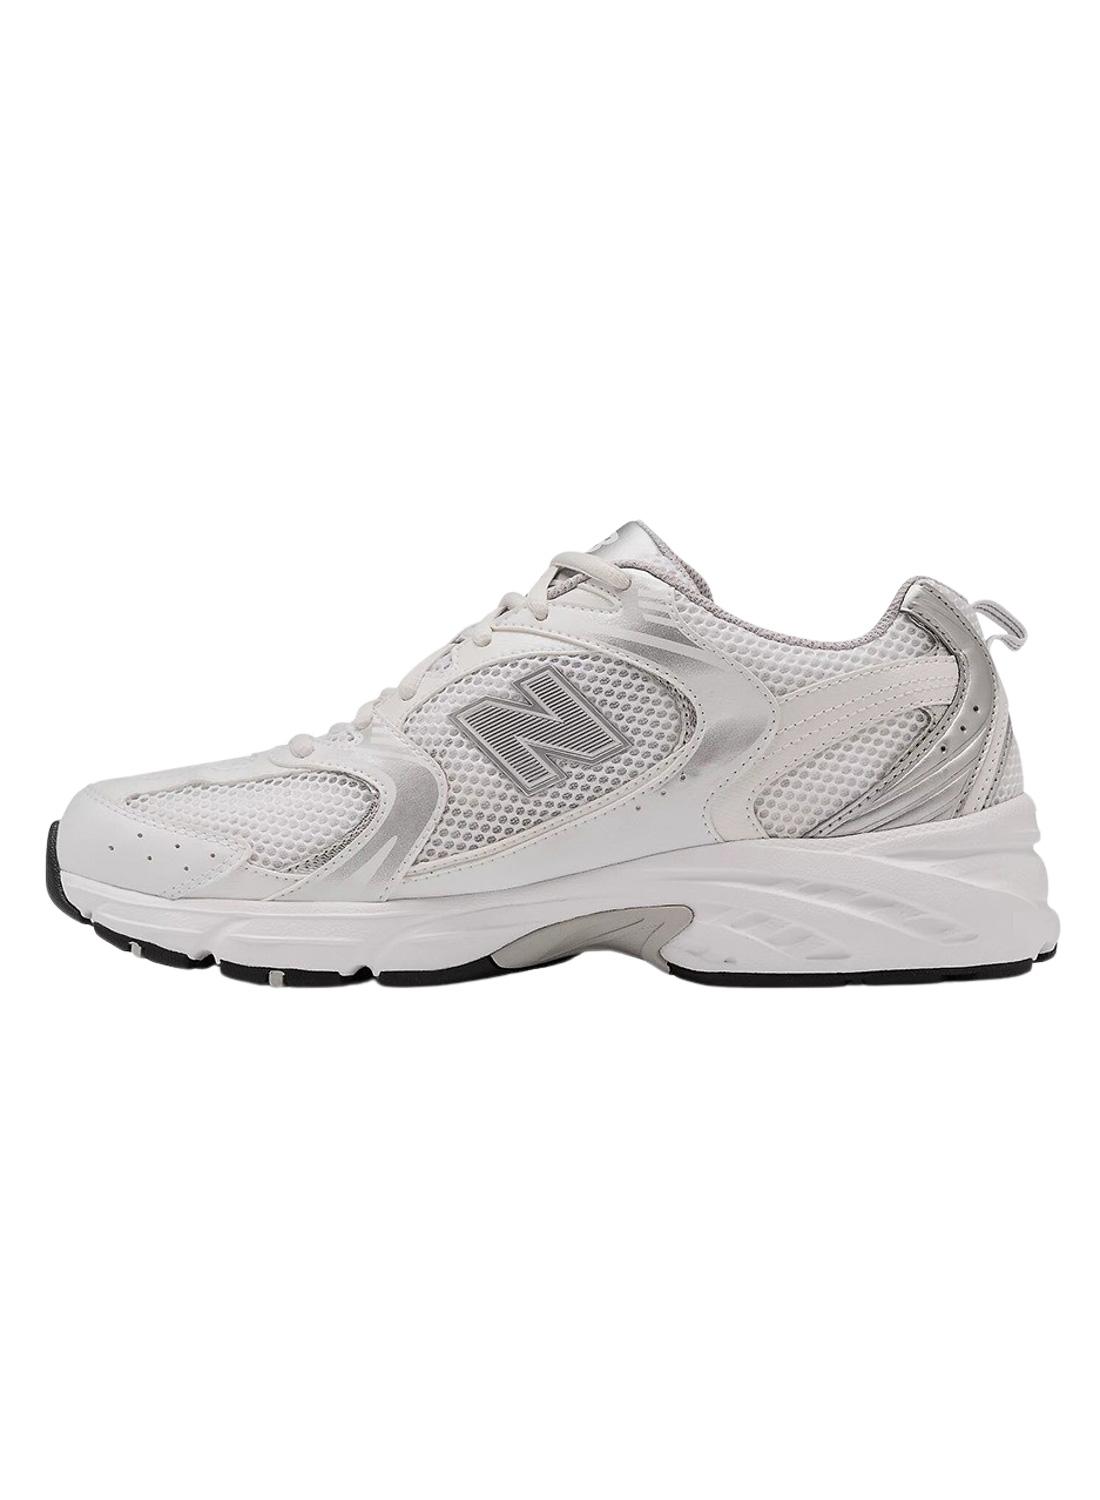 Sneakers New Balance 530 per Donna Bianco